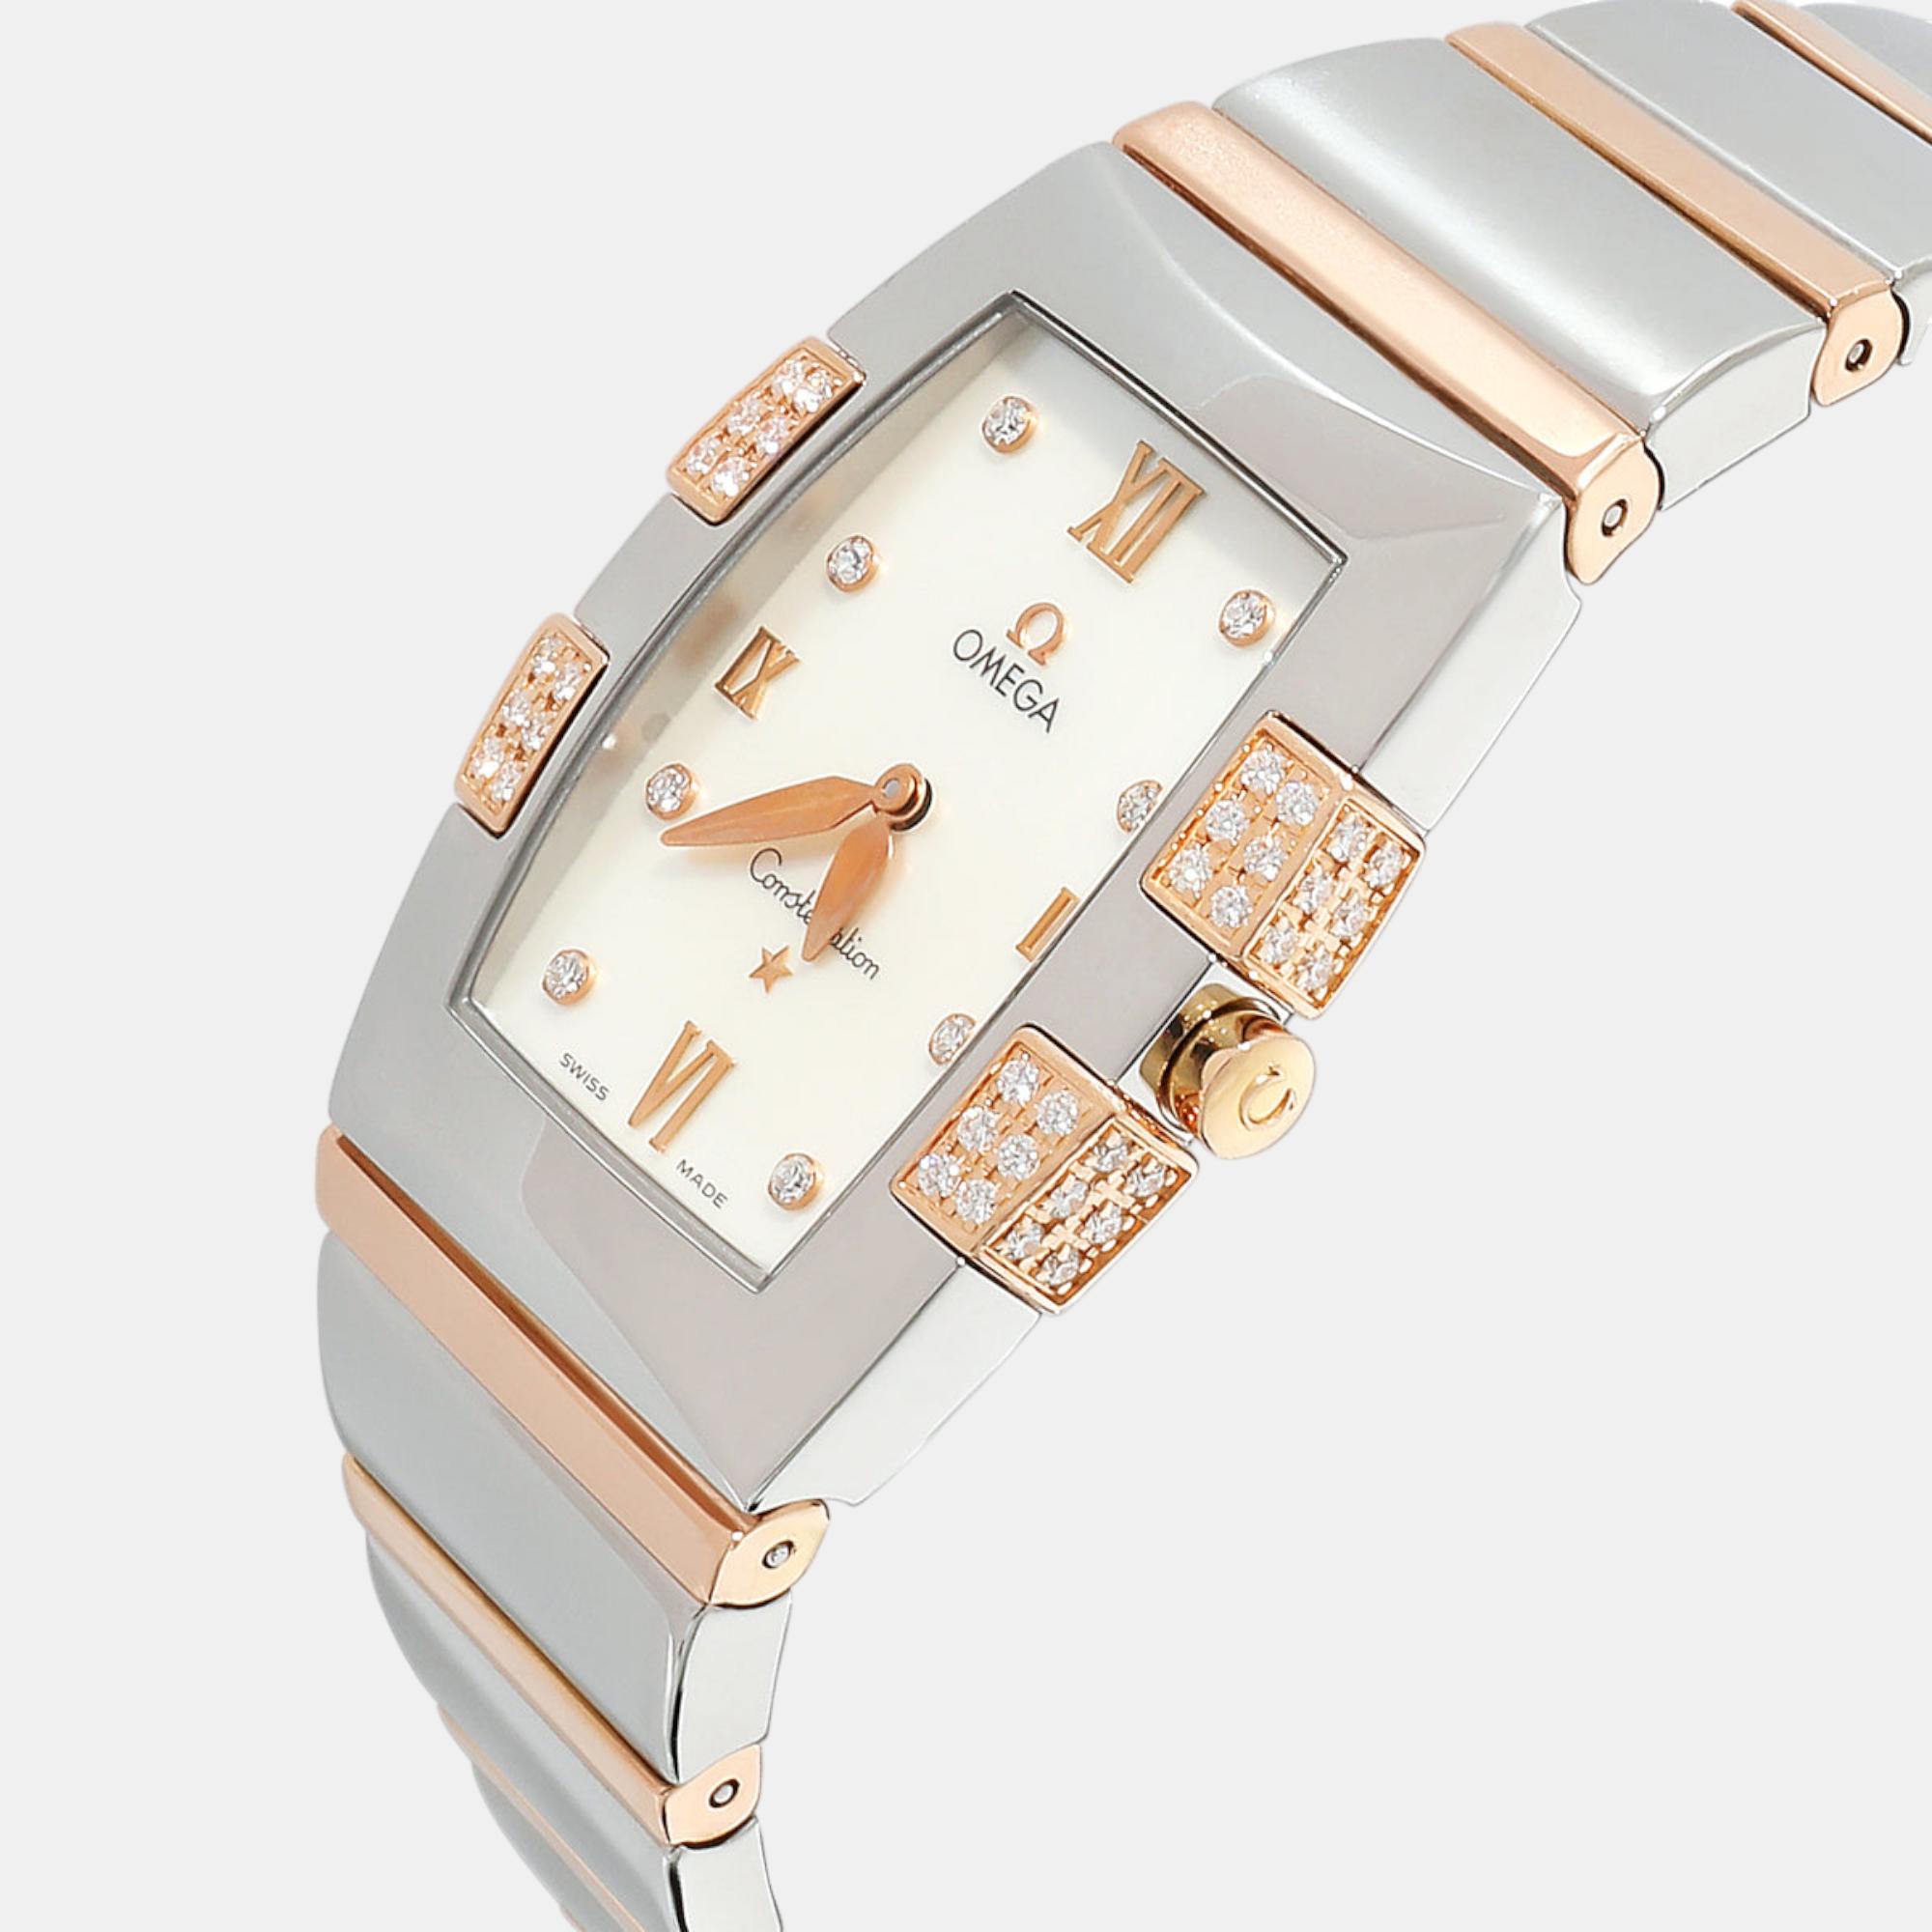 

Omega White Mother of Pearl 18k Rose Gold And Stainless Steel Constellation Quadrella 1286.75 Quartz Women's Wristwatch 25 mm